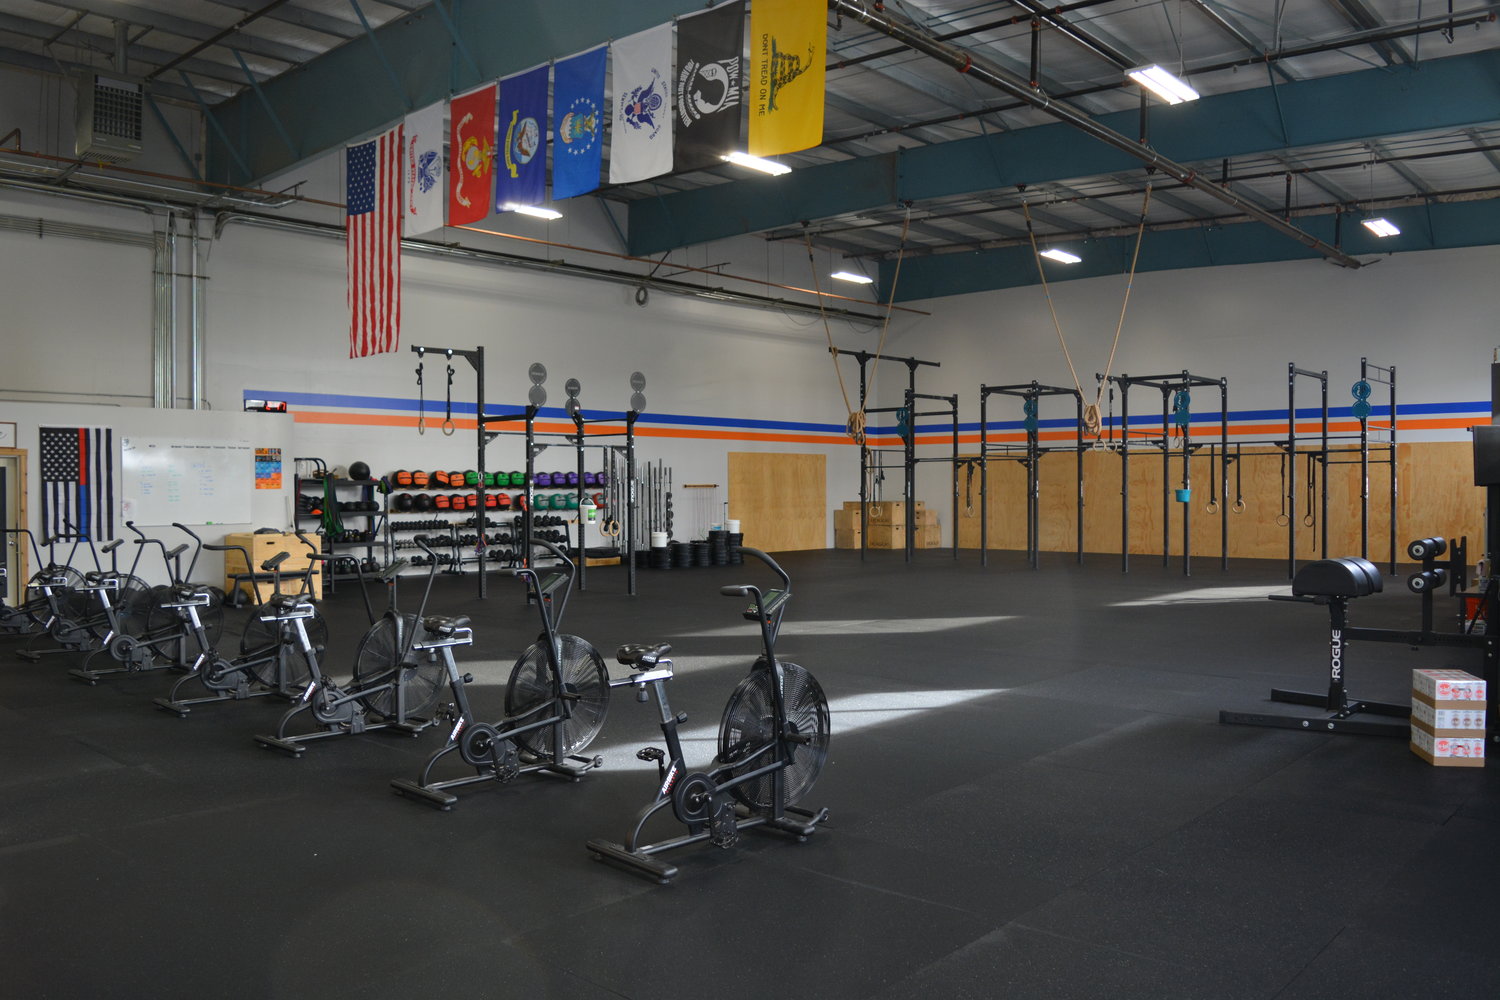 The 6,000-square-foot gym is big enough to allow classes of 14 people during Phase 2 of Washington's reopening plan.